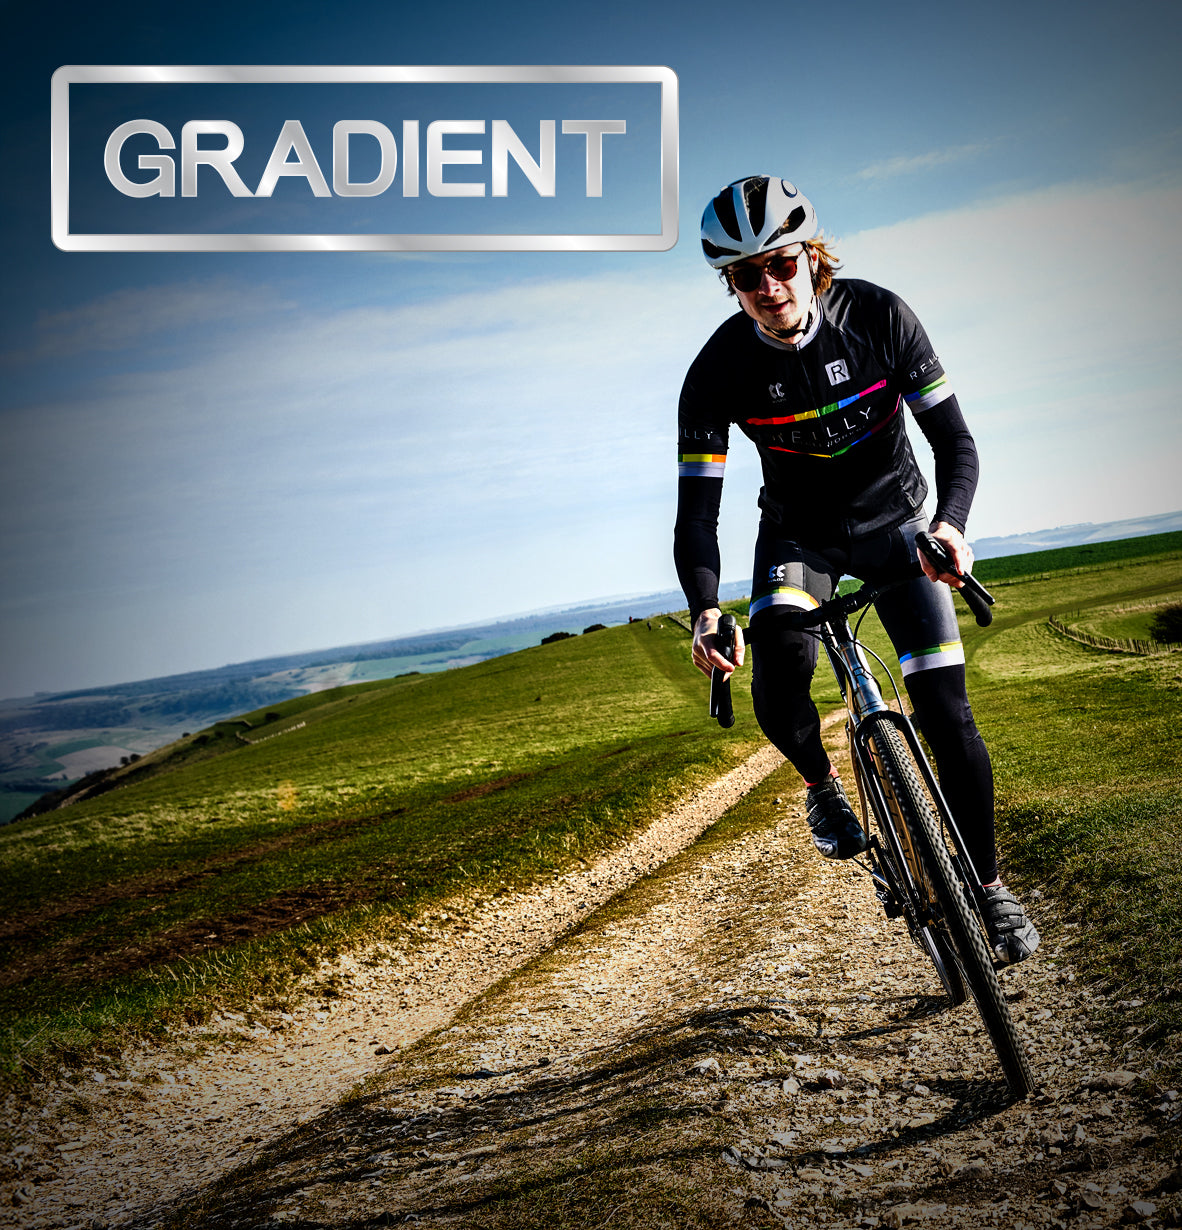 Man rides gravel bike, gravel path and green fields can be seen in the background. GRADIENT is written top left.